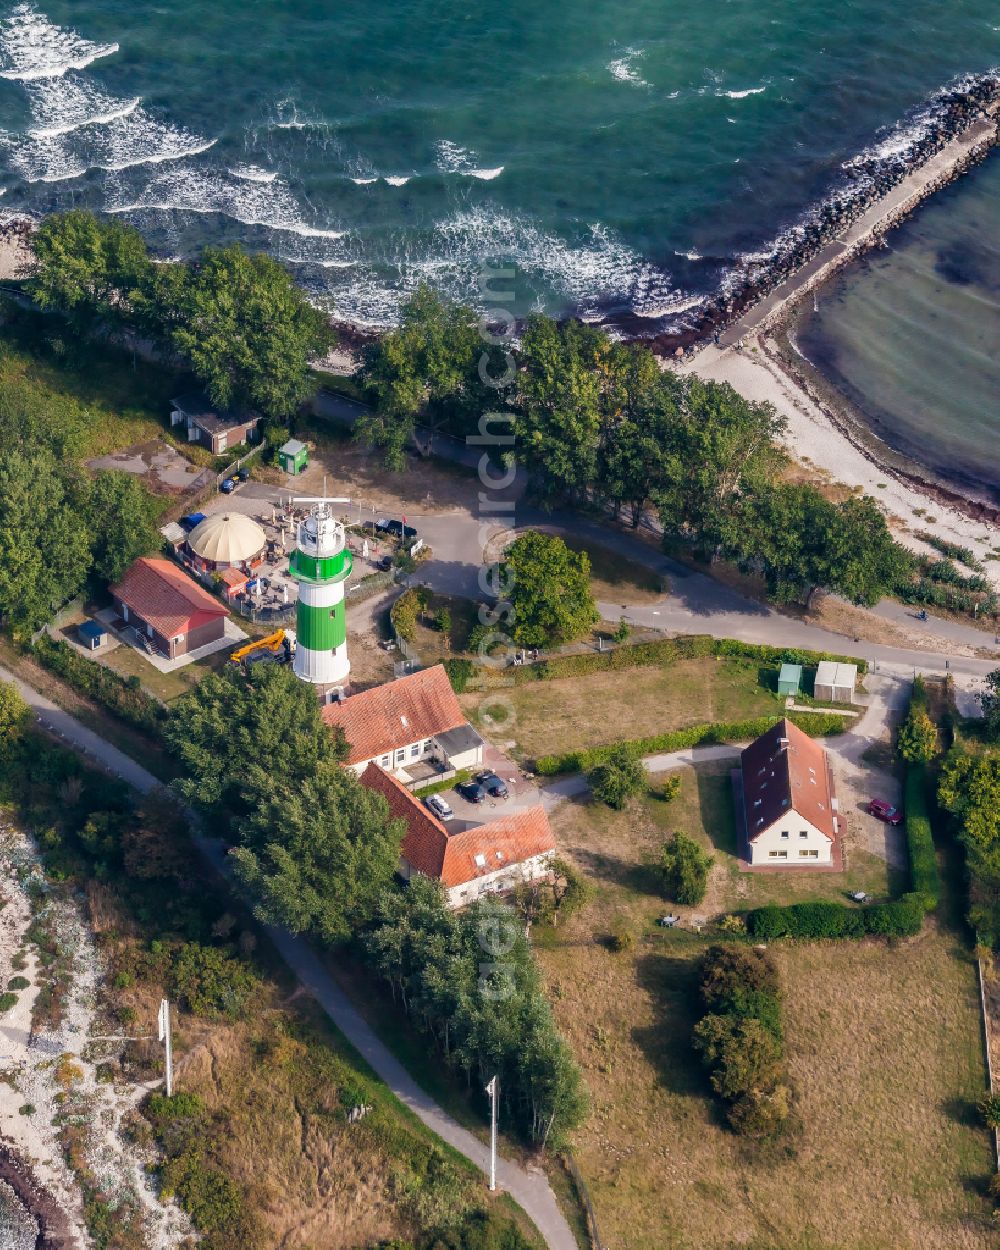 Aerial image Strande - Lighthouse as a historic seafaring character in the coastal area Buelk on street Buelker Weg in Strande in the state Schleswig-Holstein, Germany